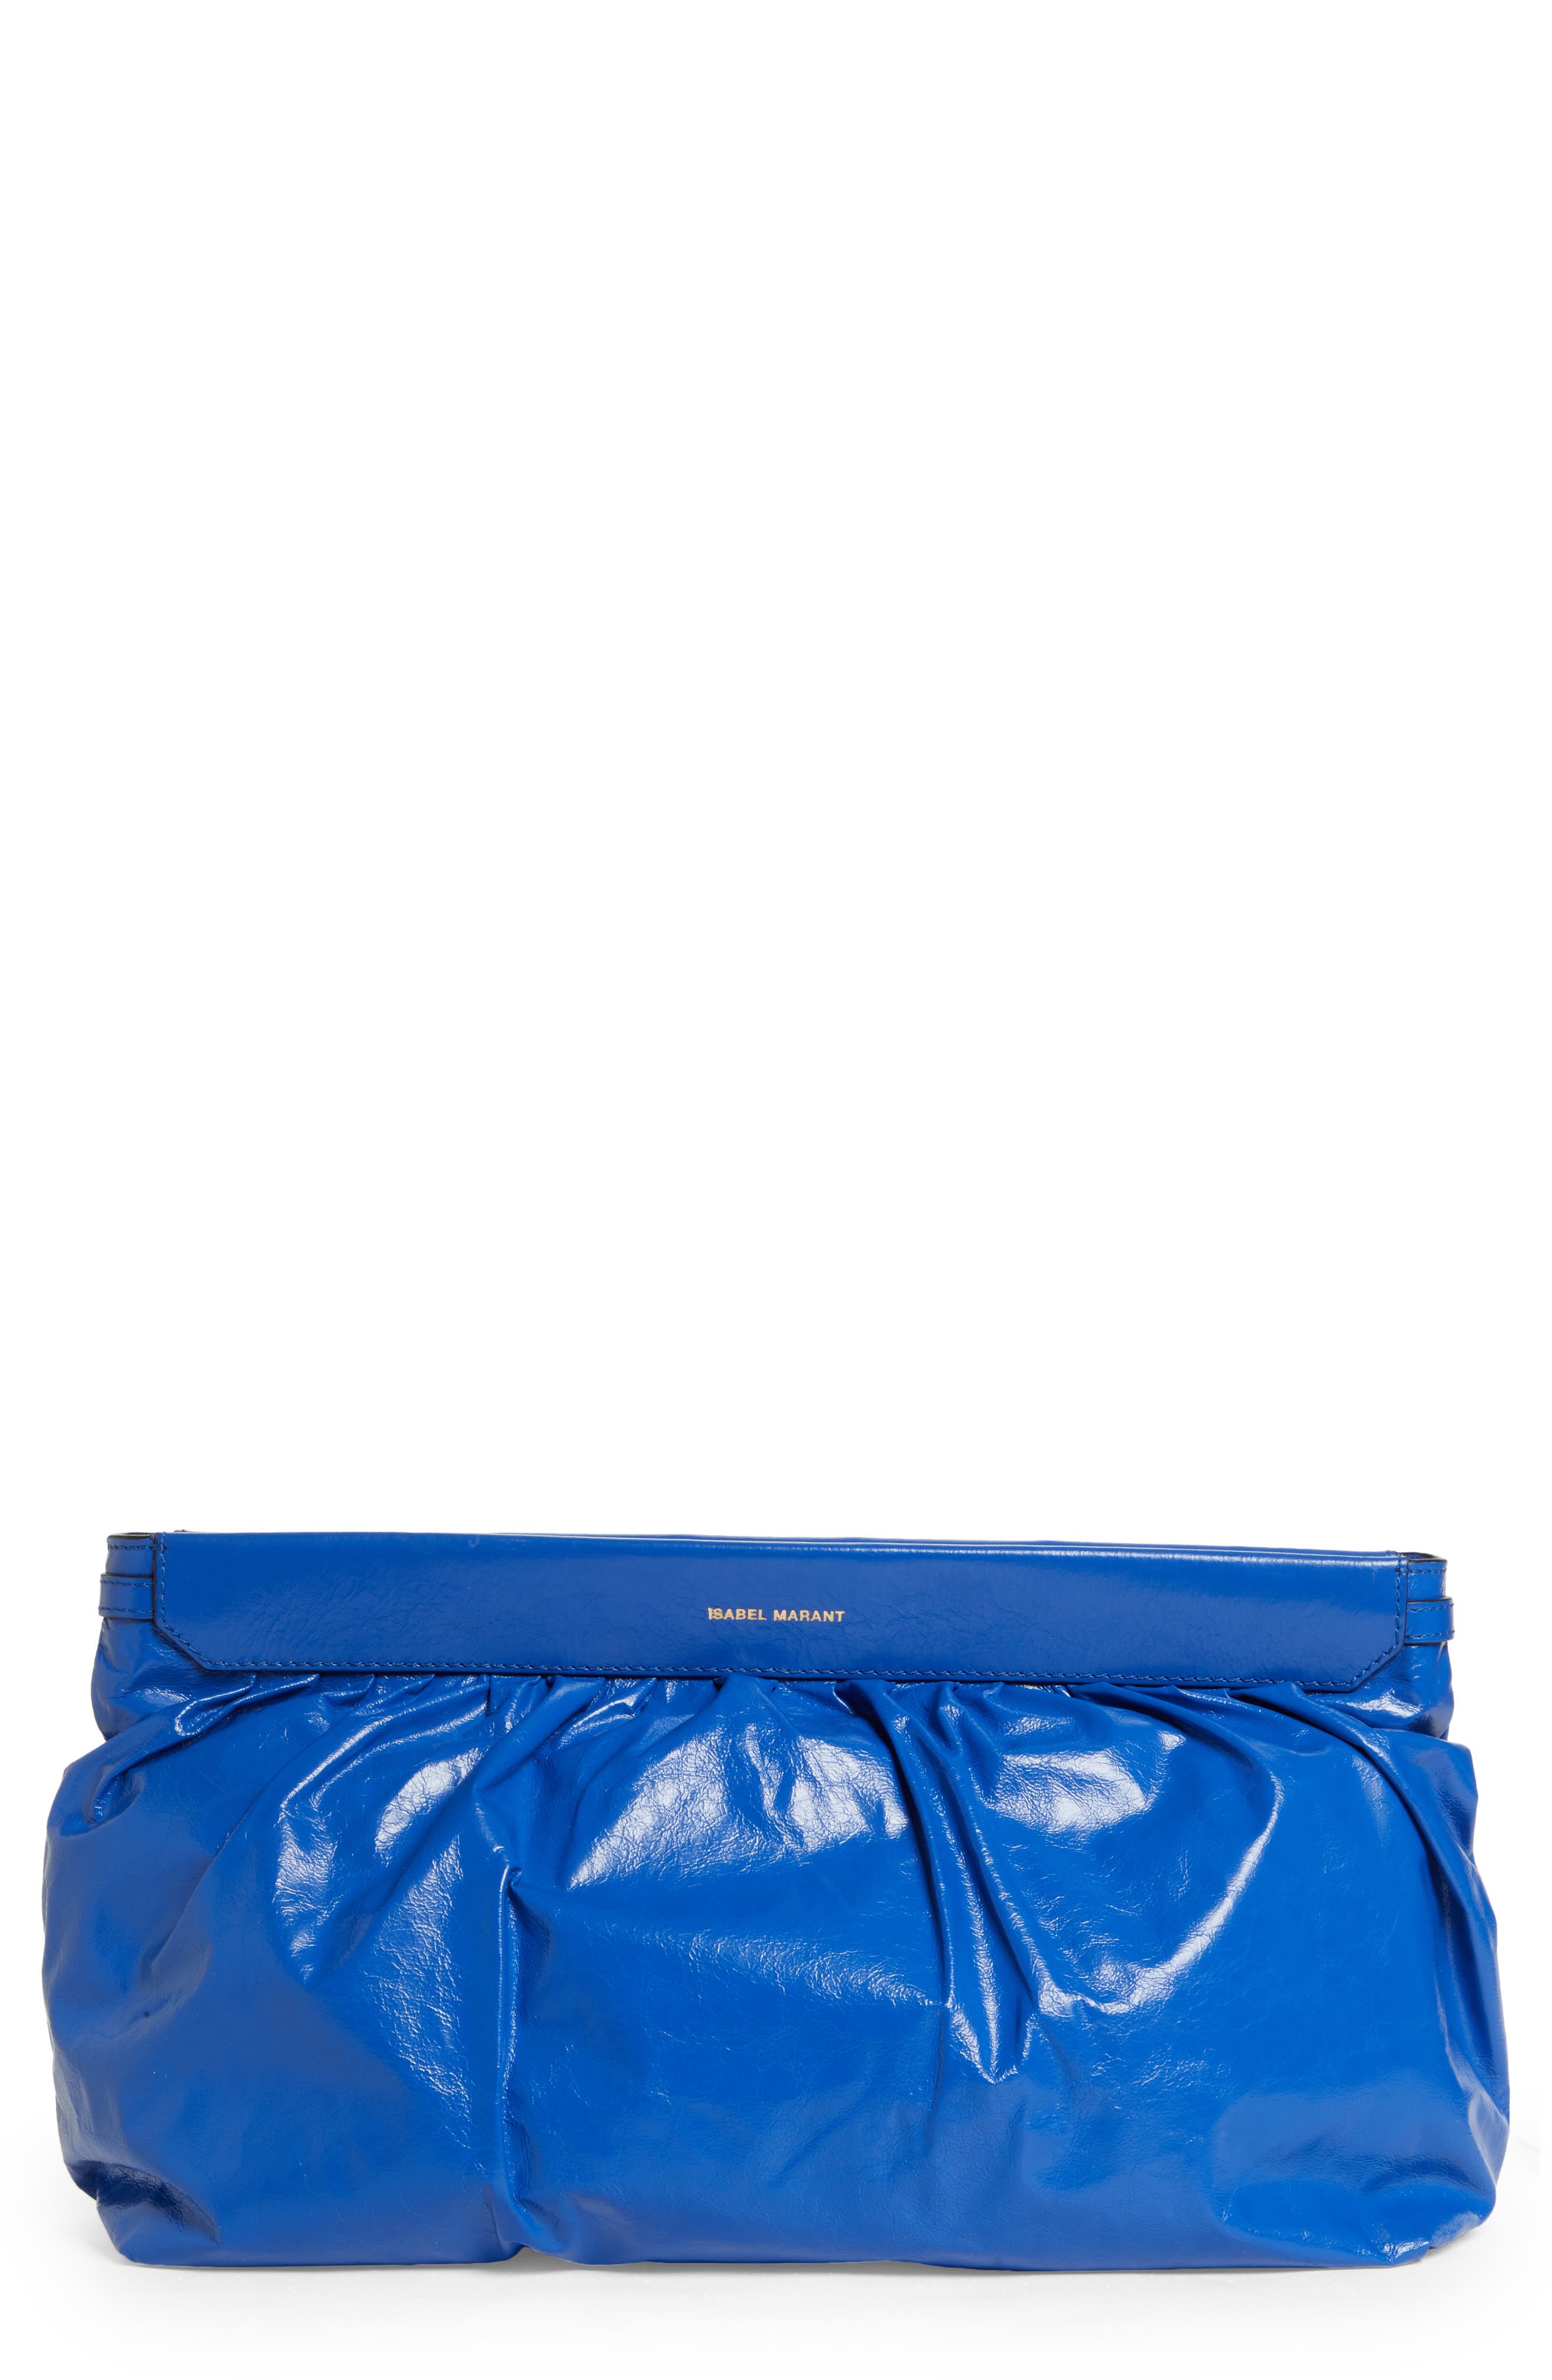 Womens Bags Clutches and evening bags in Blue Isabel Marant Bags. 